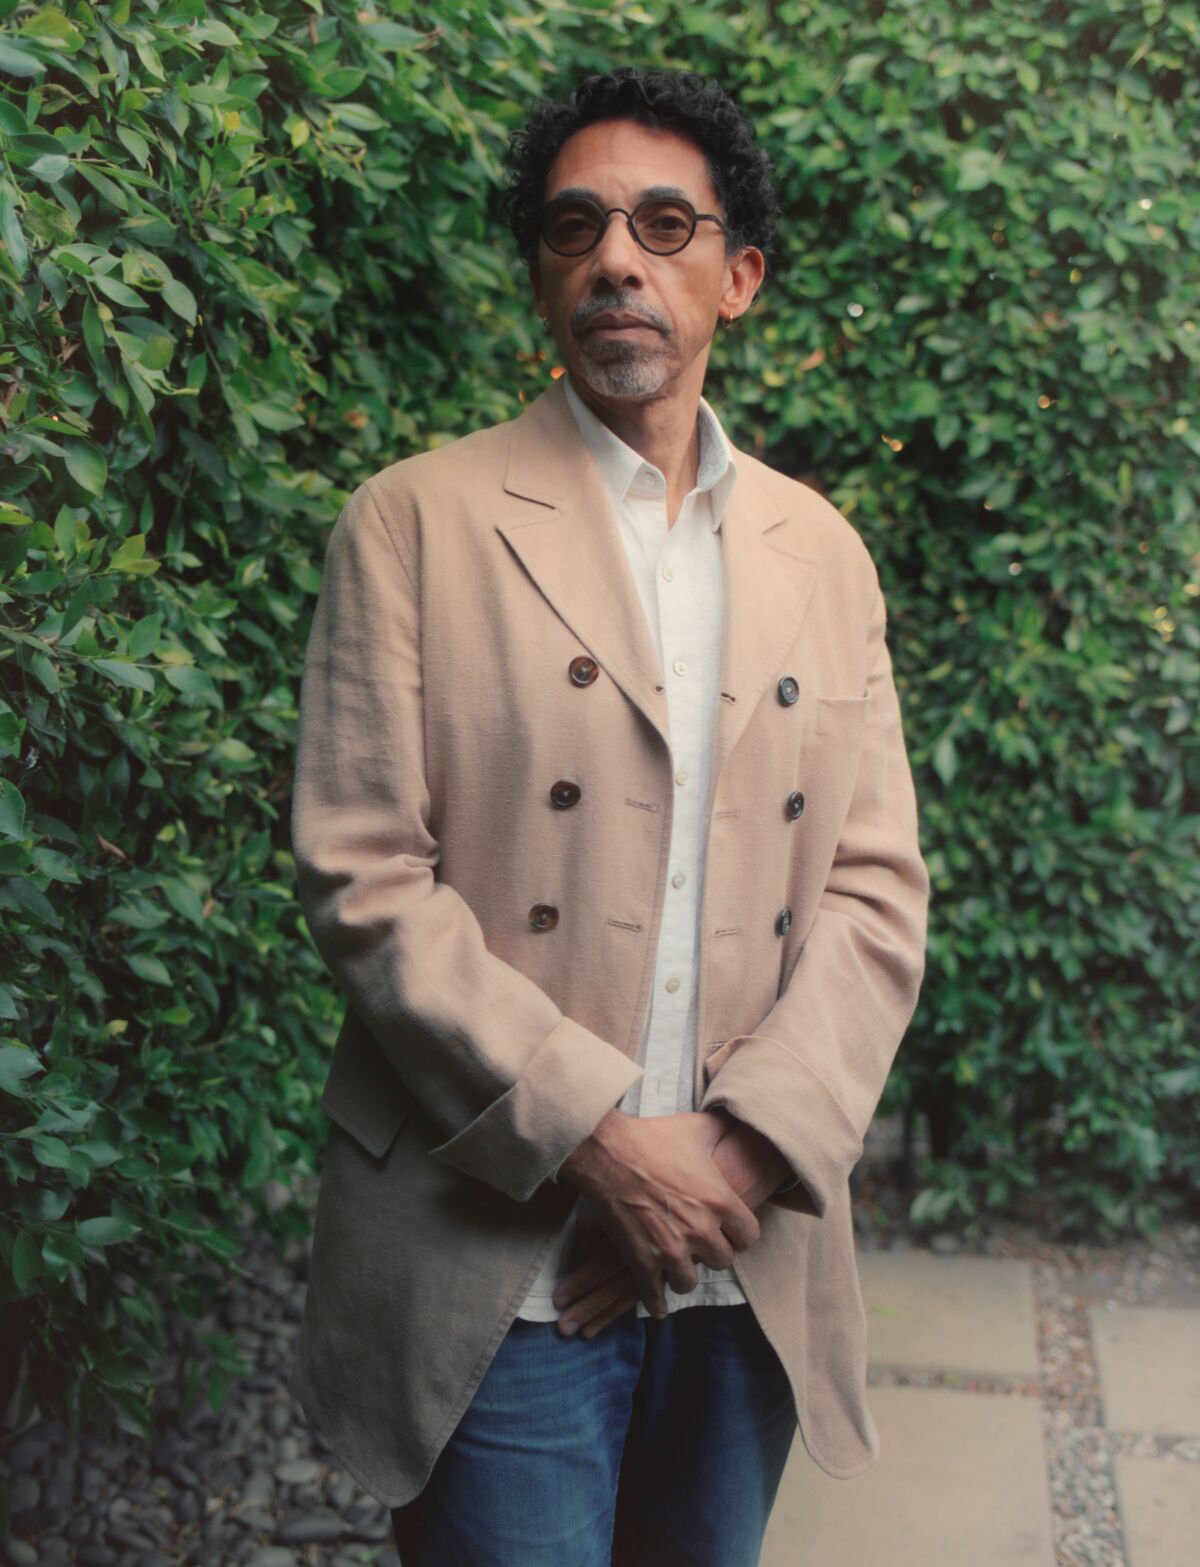 Historian/writer Robin D.G. Kelley stands outdoors in front of a shrub.